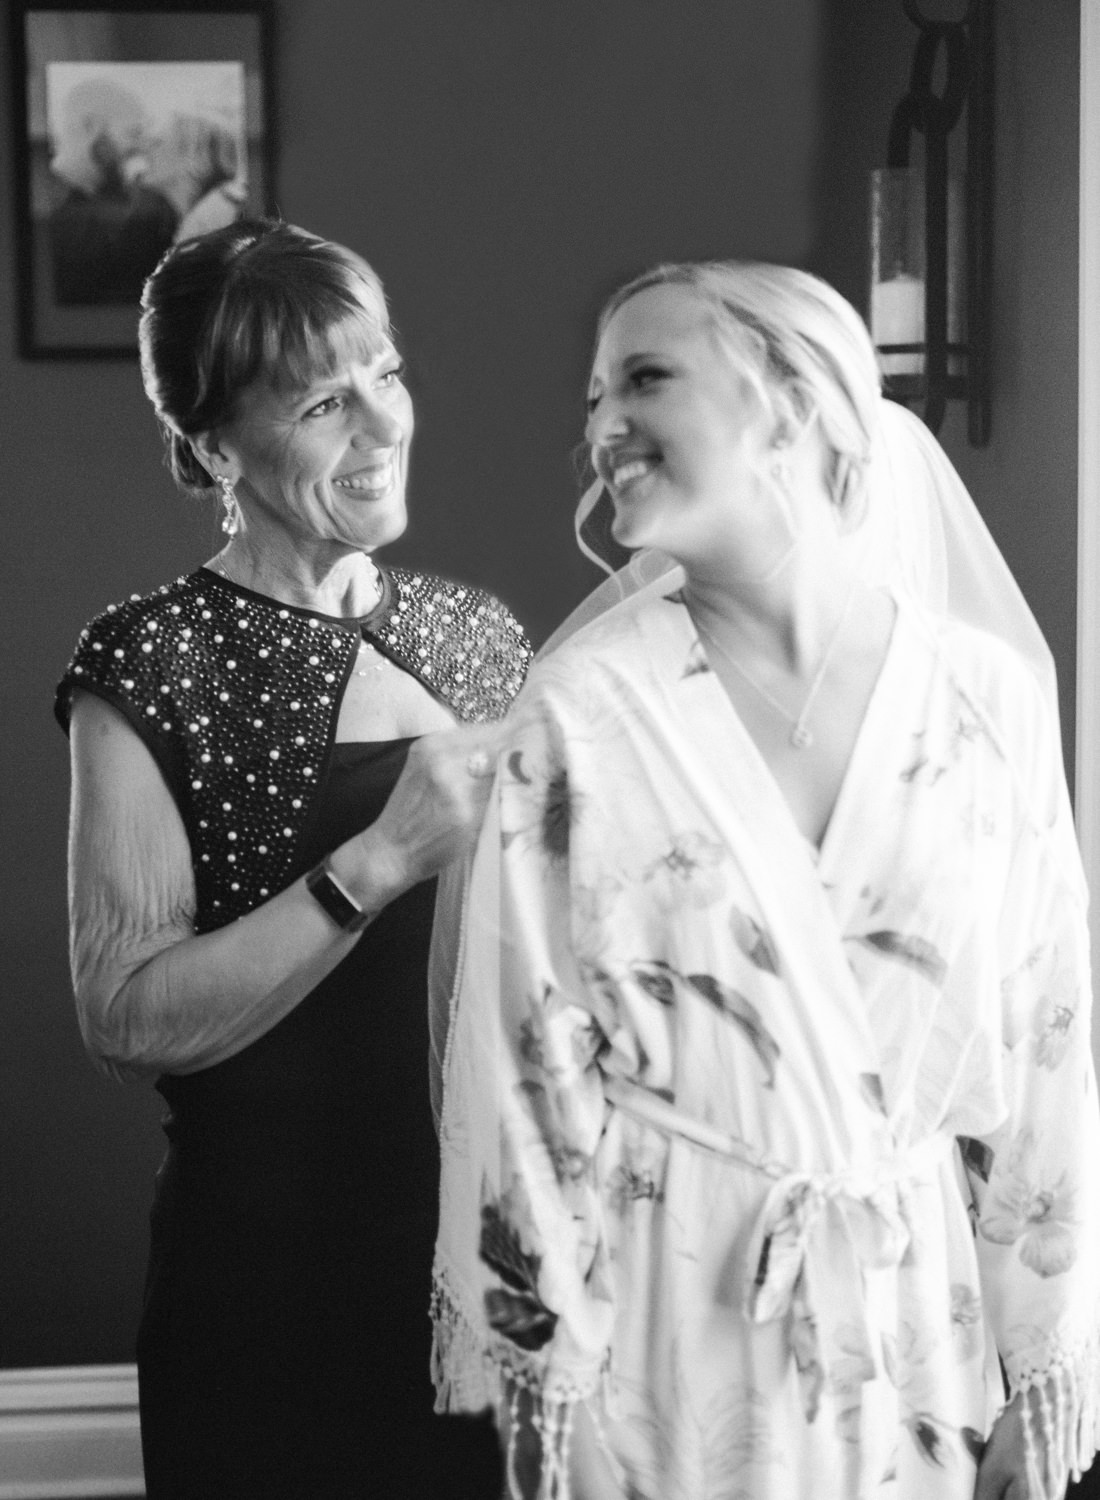 Mom helping bride with veil; St. Louis wedding photographer